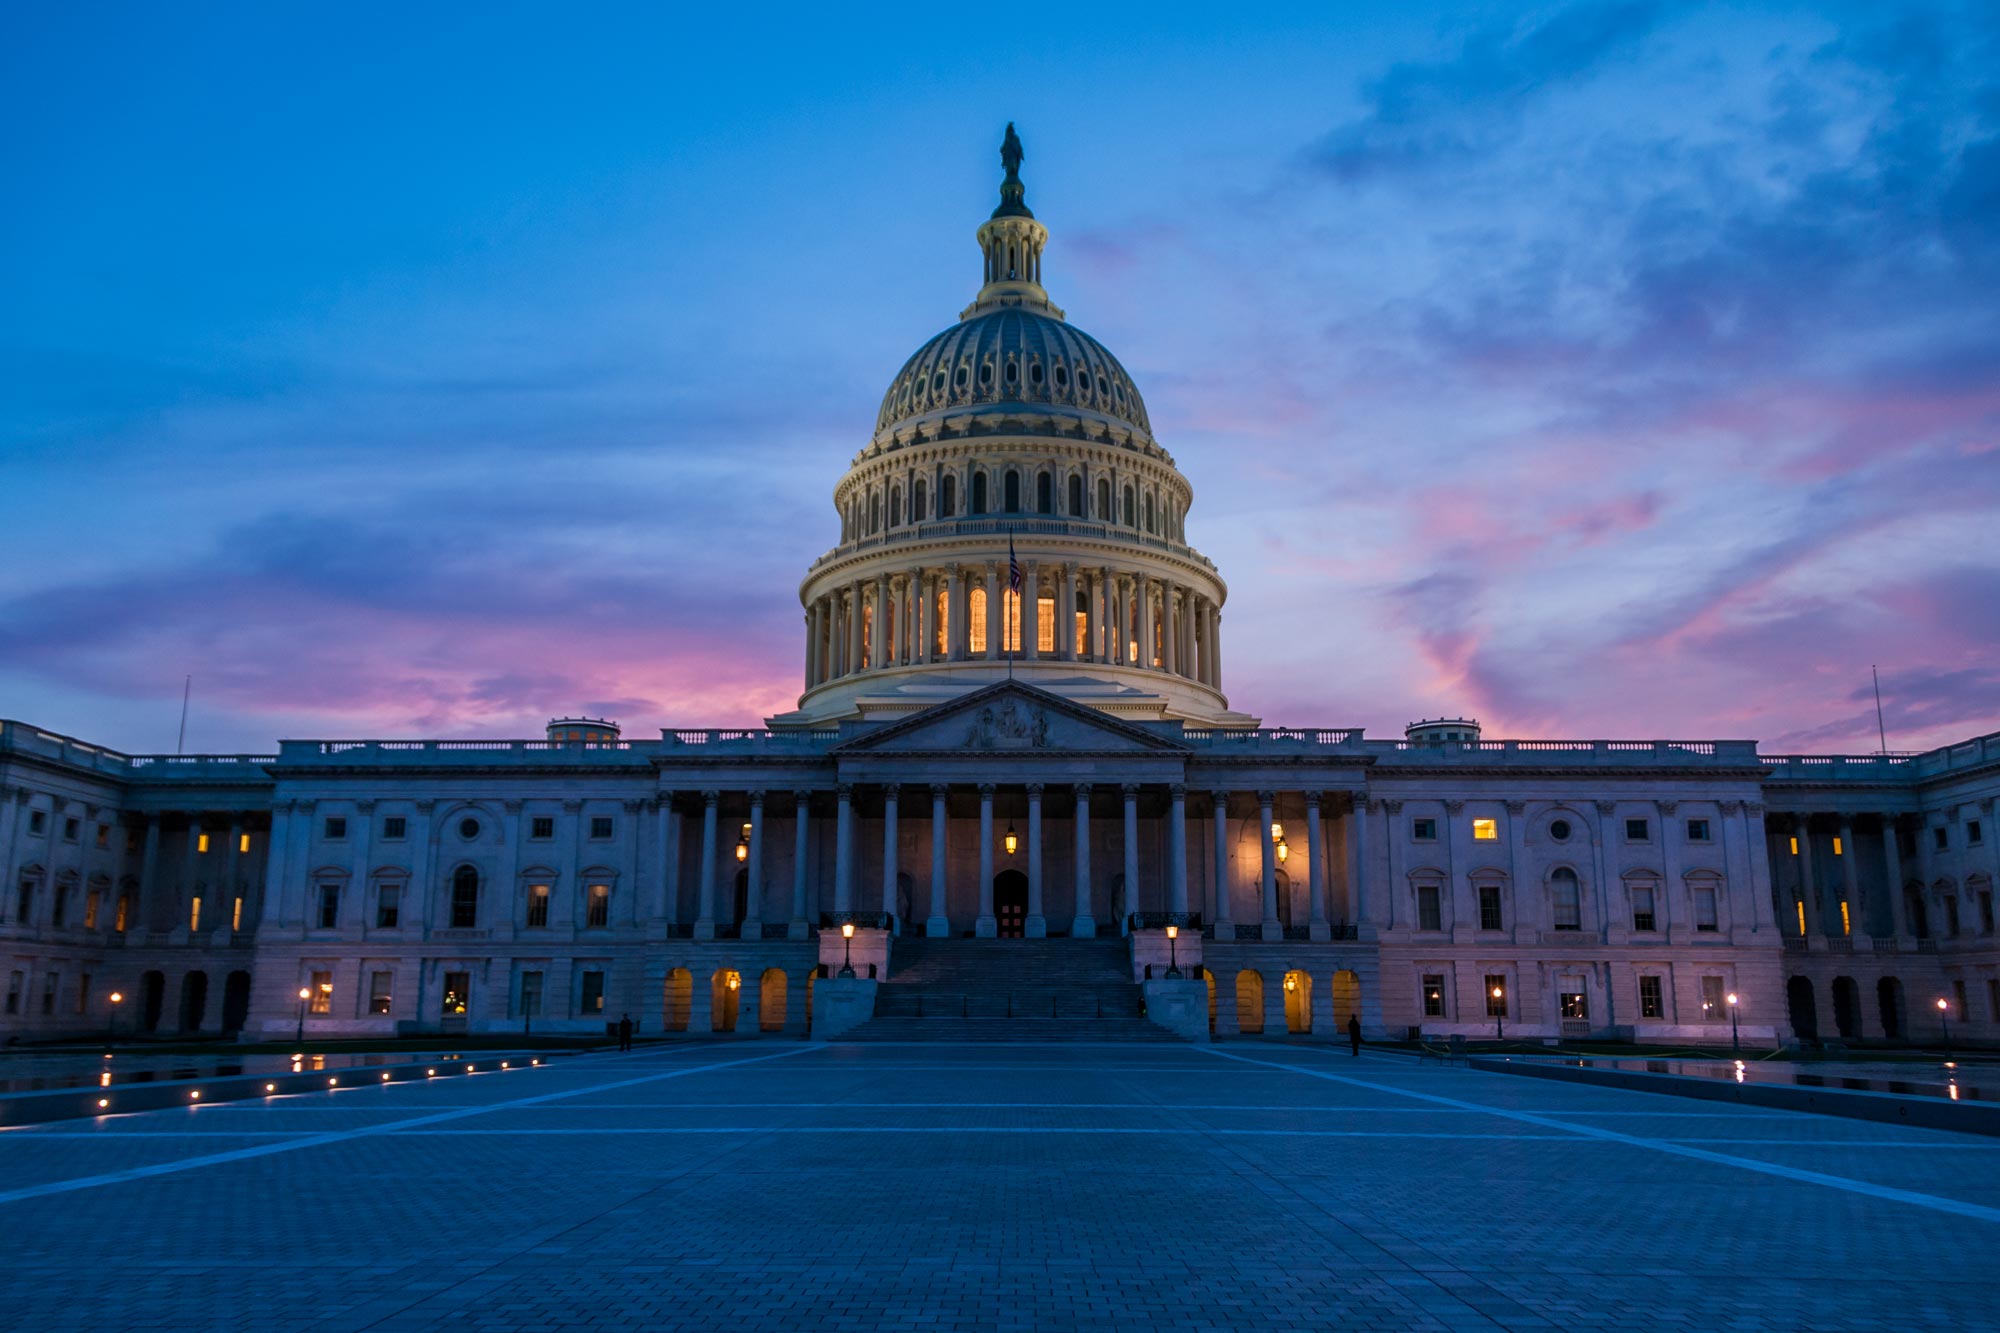 United States Capital building at dusk with a pink, purple, and blue sky